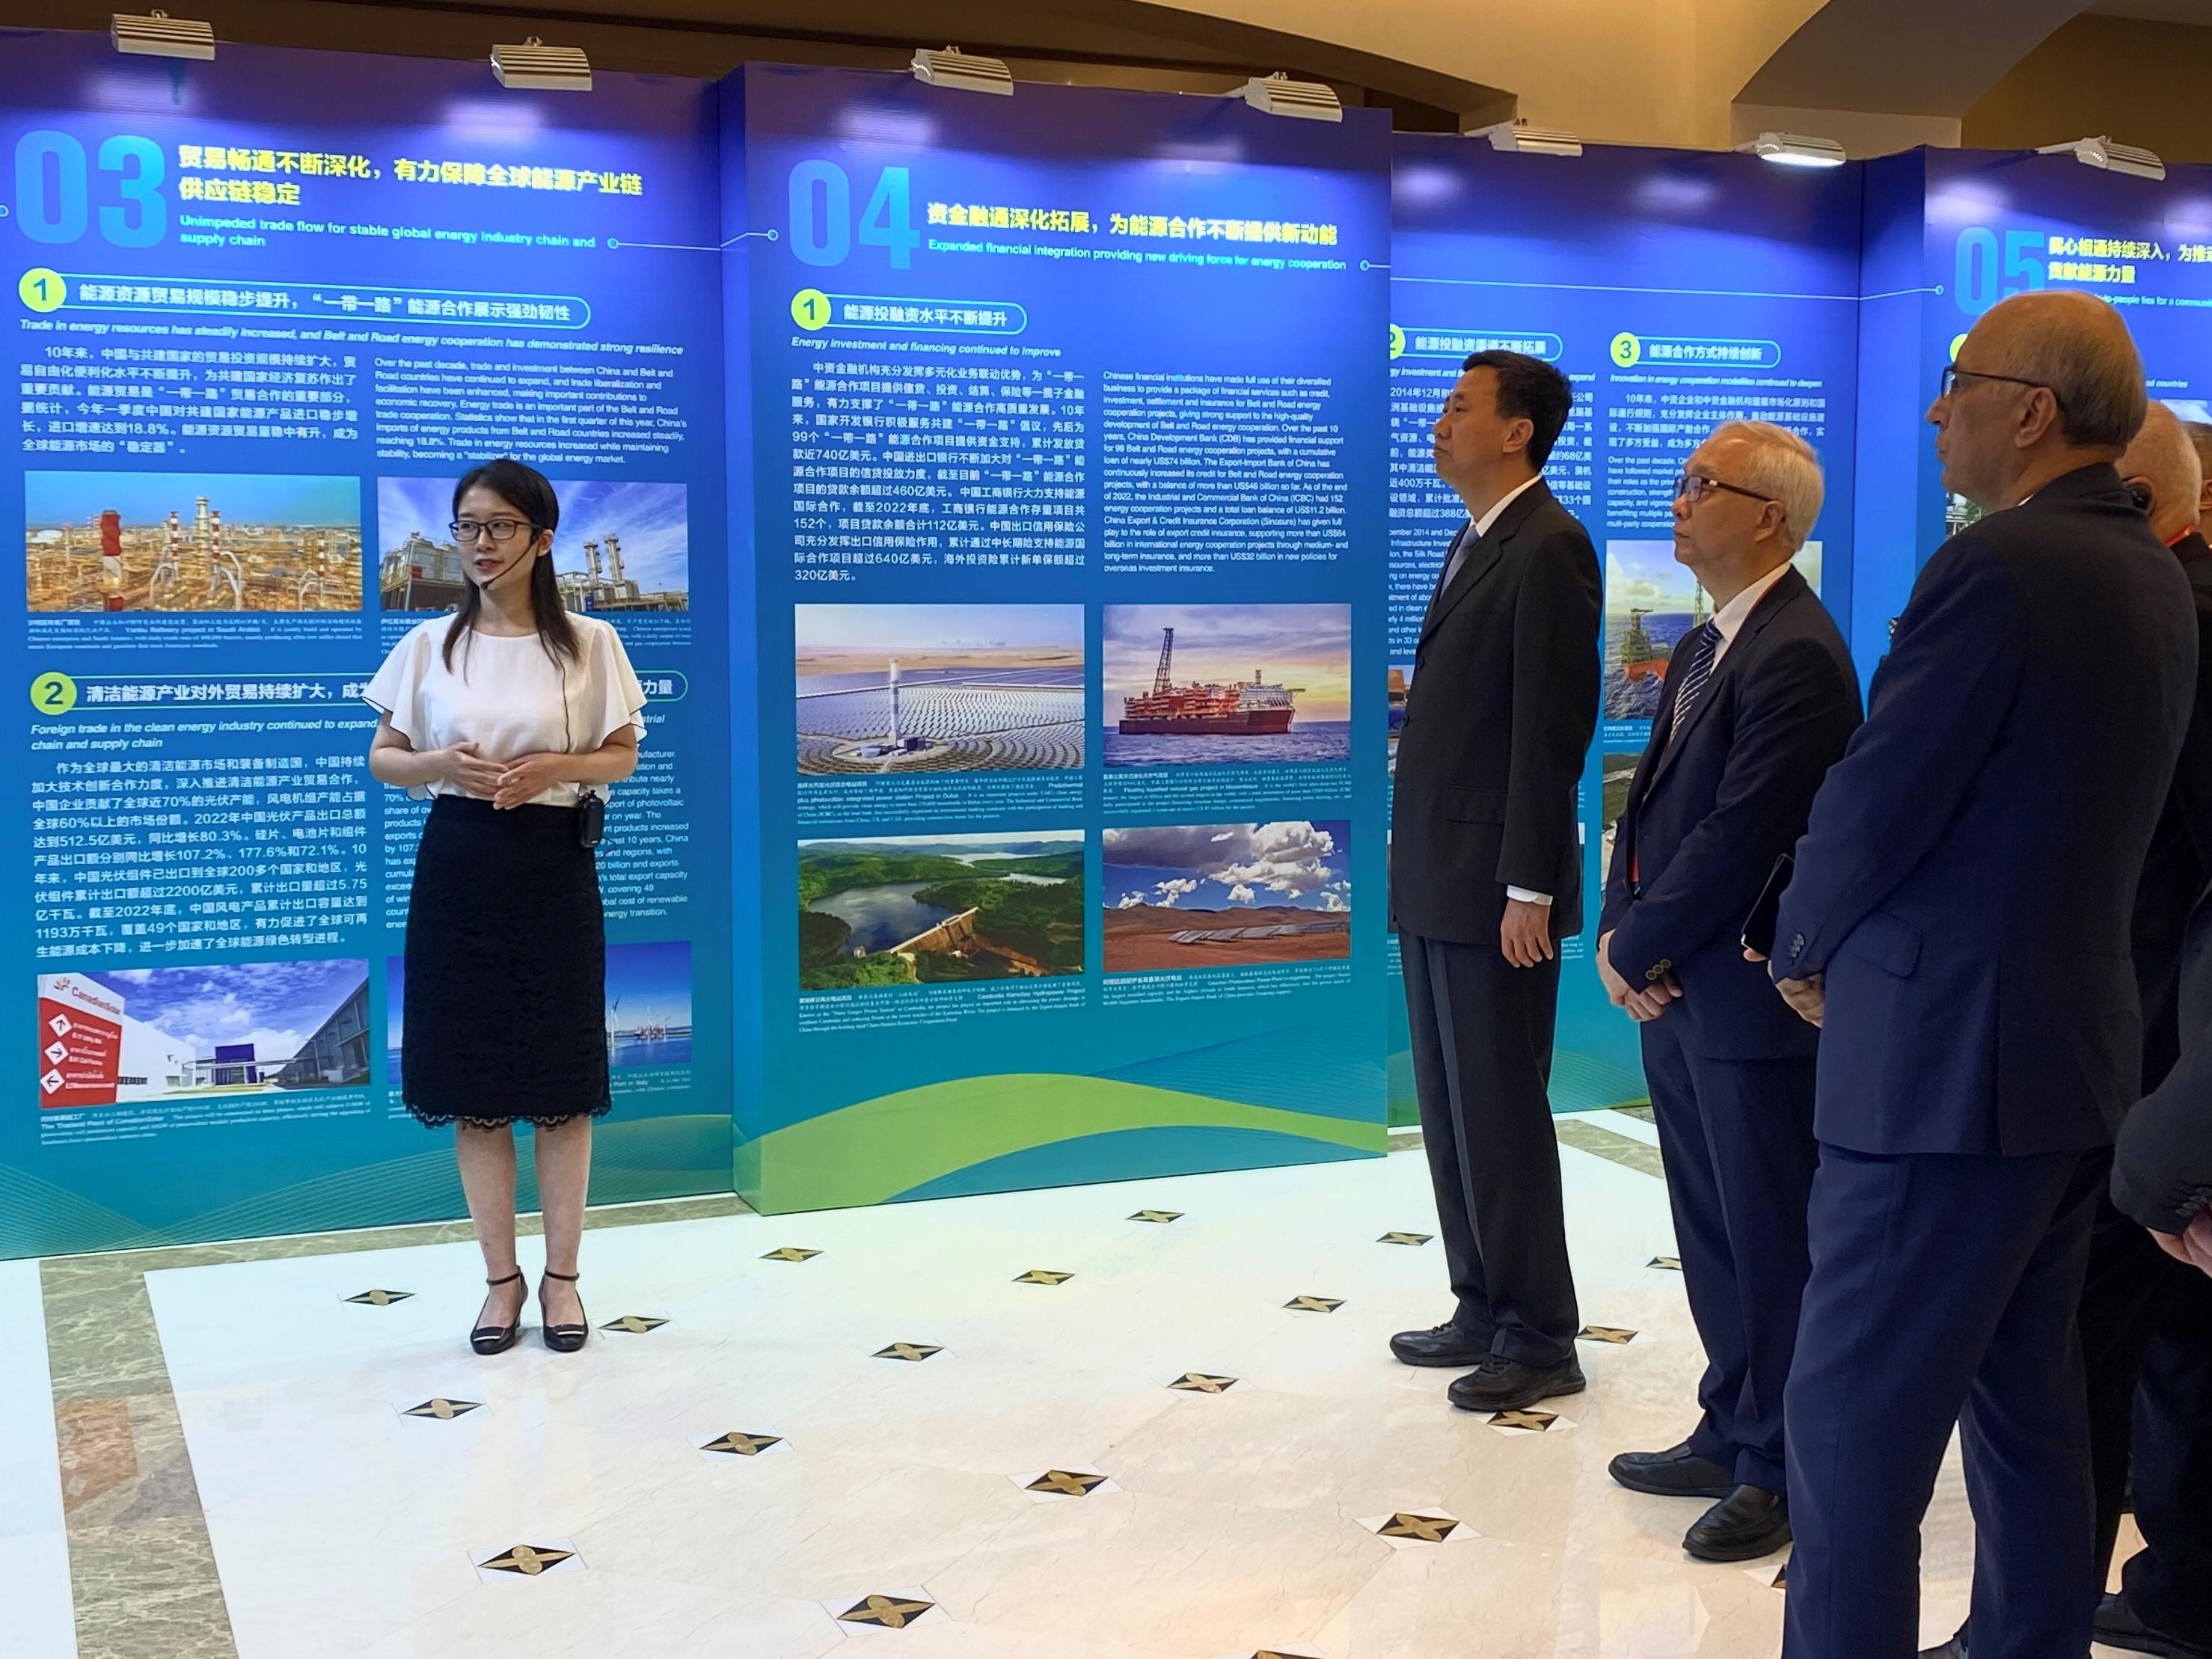 The Secretary for Environment and Ecology, Mr Tse Chin-wan, today (May 24) attended the Third Belt and Road Energy Partnership Forum in Xiamen. Photo shows Mr Tse (second right) and Deputy Director of the National Energy Administration Mr Ren Jingdong (third right), visiting the Exhibition on the 10th Anniversary of Belt and Road Energy Cooperation, specially set-up for the event, with representatives from other  countries. 